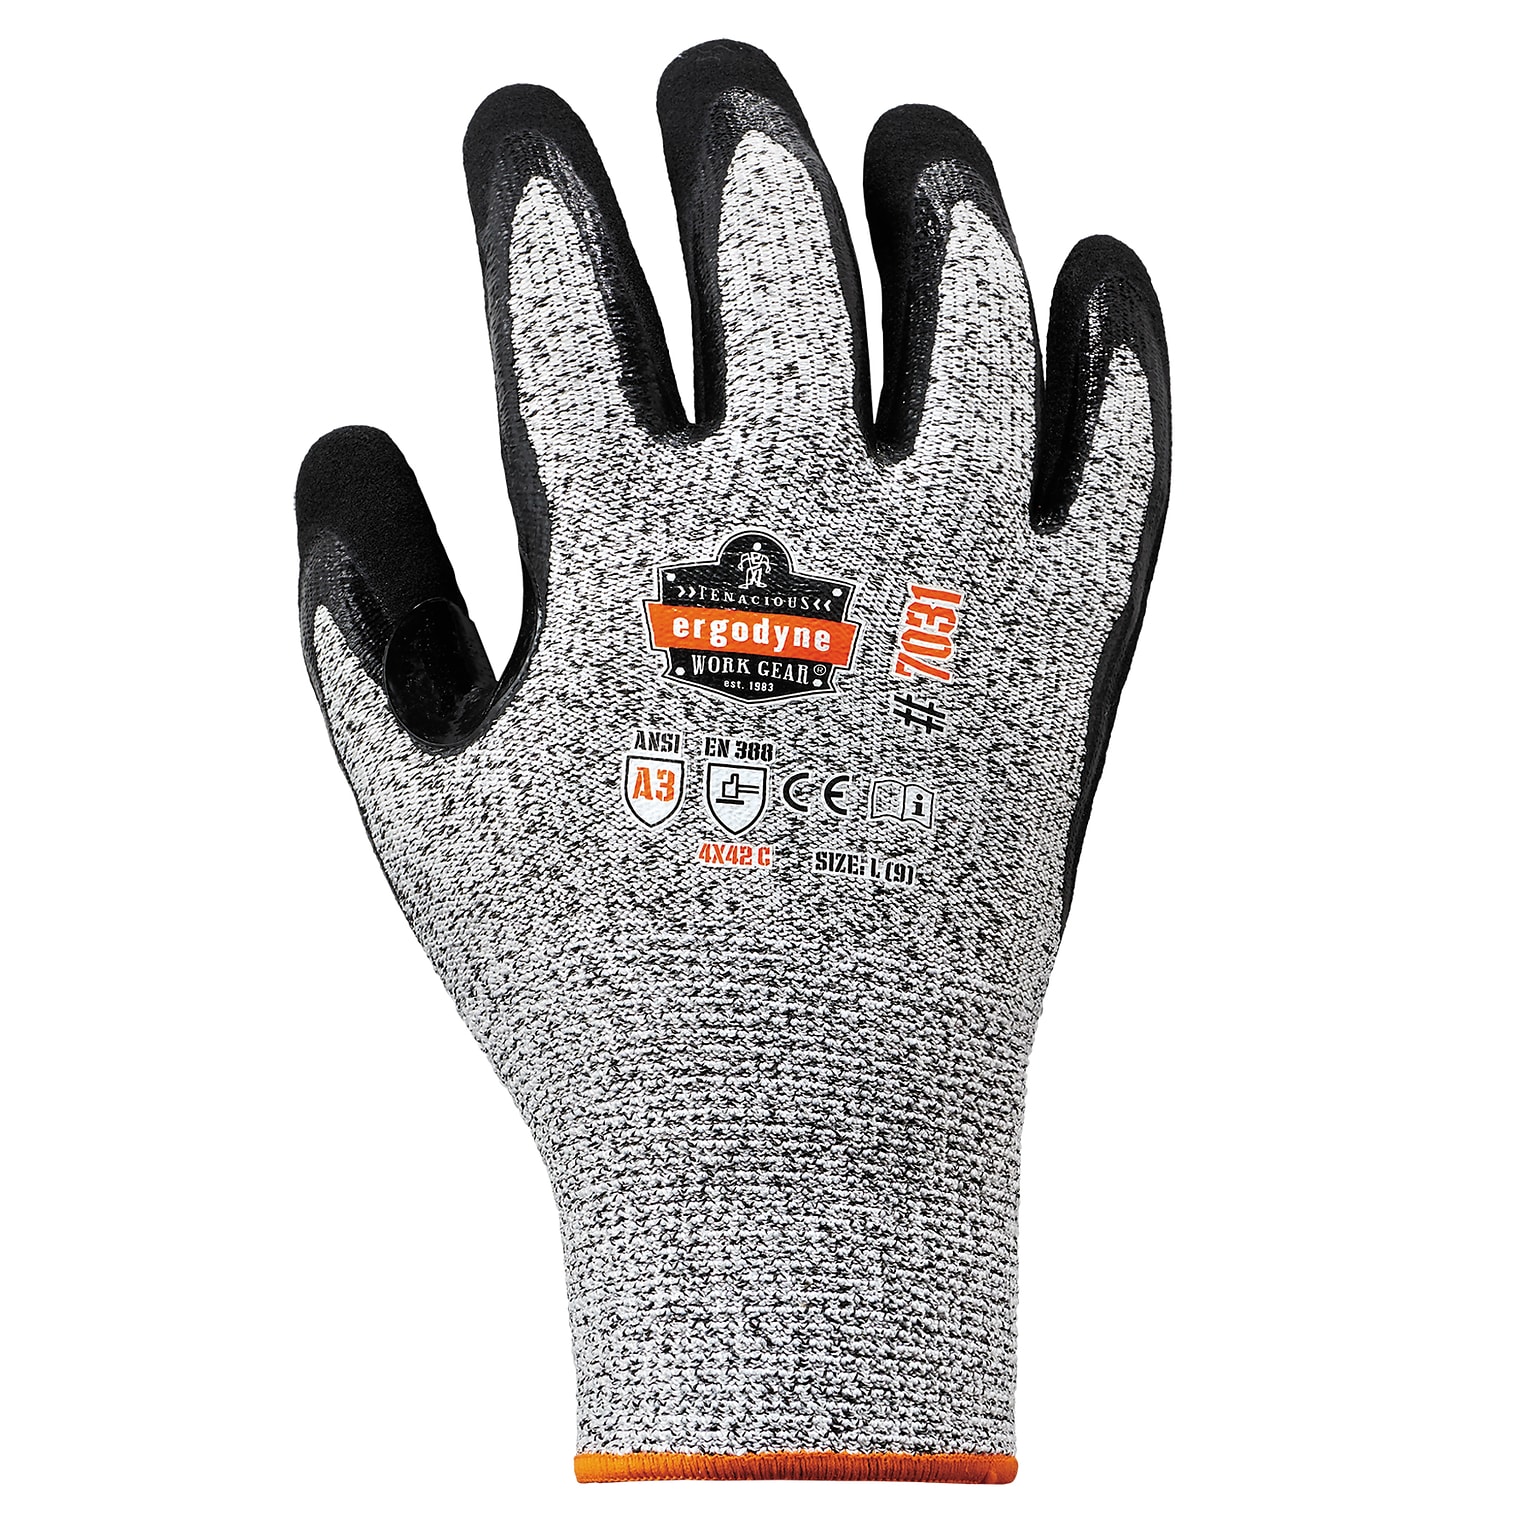 Ergodyne ProFlex 7031 Nitrile Coated Cut-Resistant Gloves, Small, A3 Cut Level, Gray, 144 Pairs (17882)